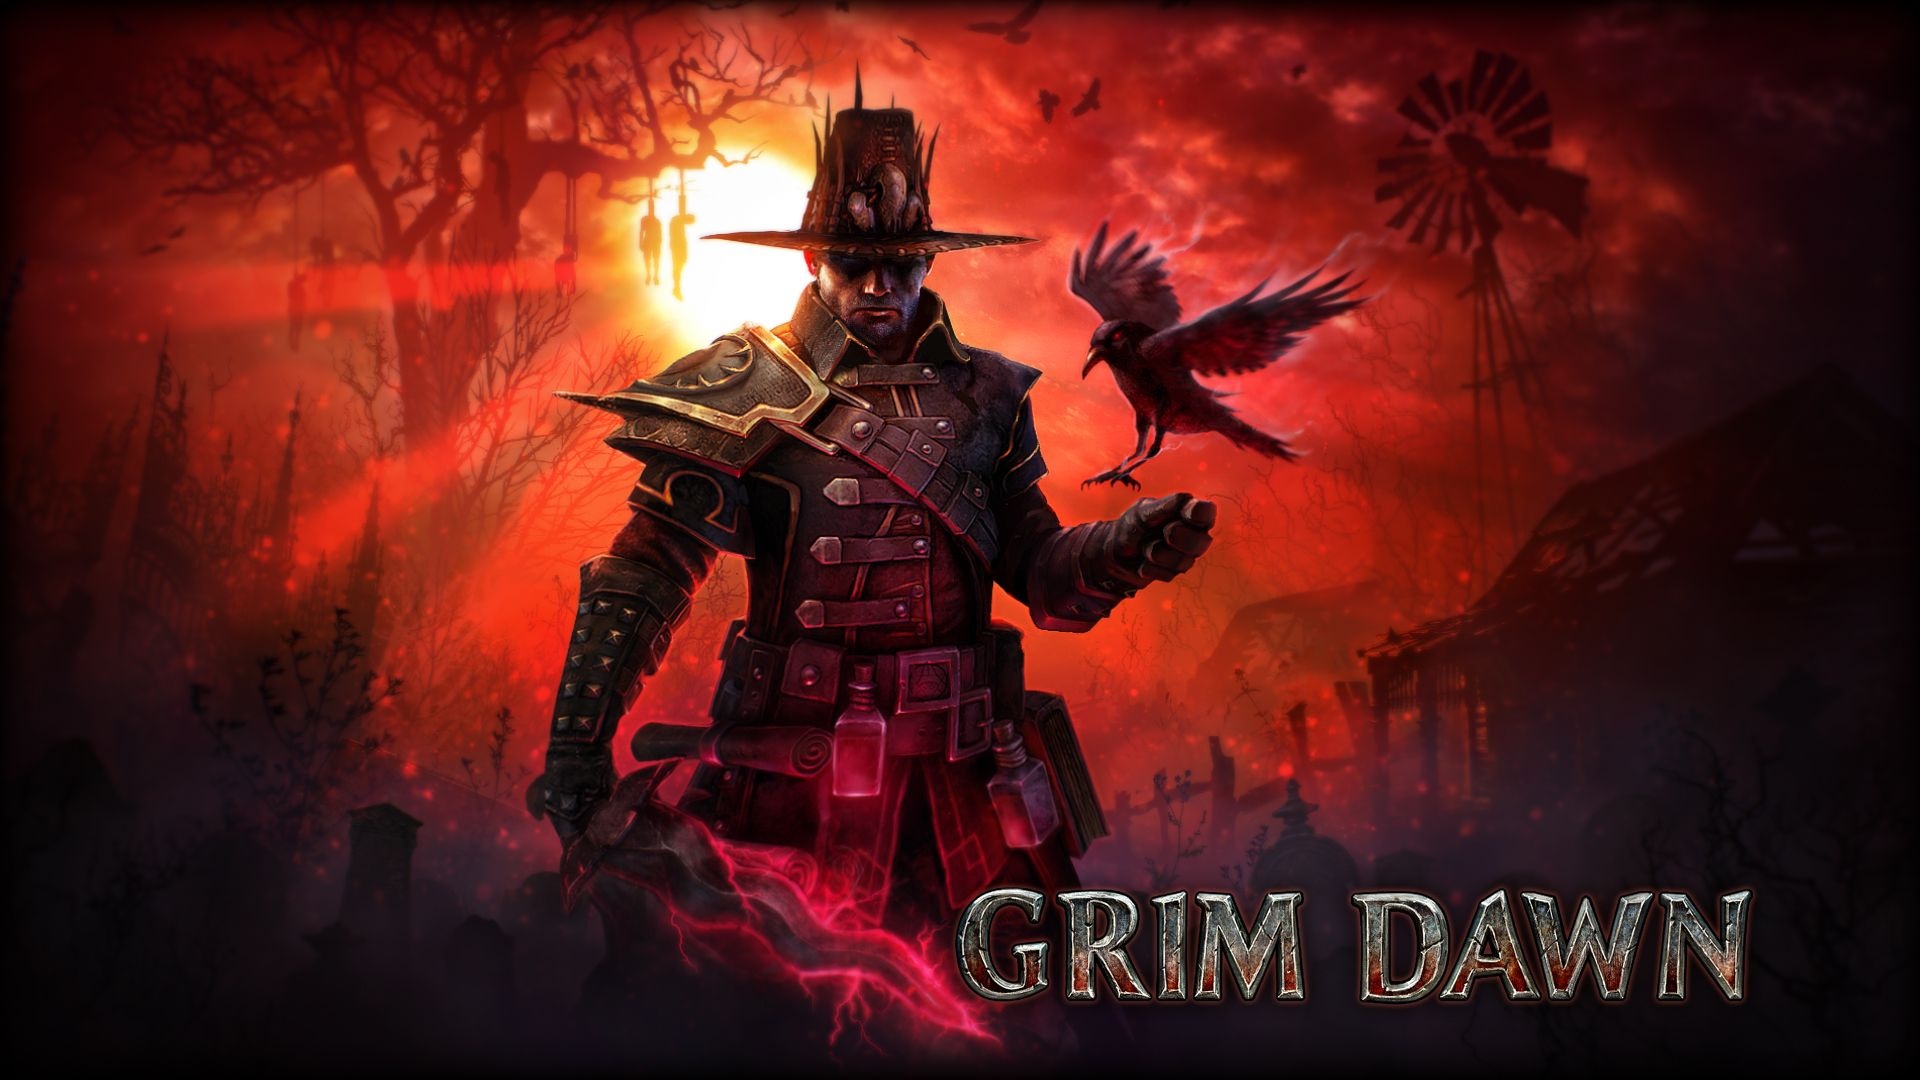 Grim Dawn: A single-player action roleplay video game with some elements of a multiplayer mode. 1920x1080 Full HD Wallpaper.